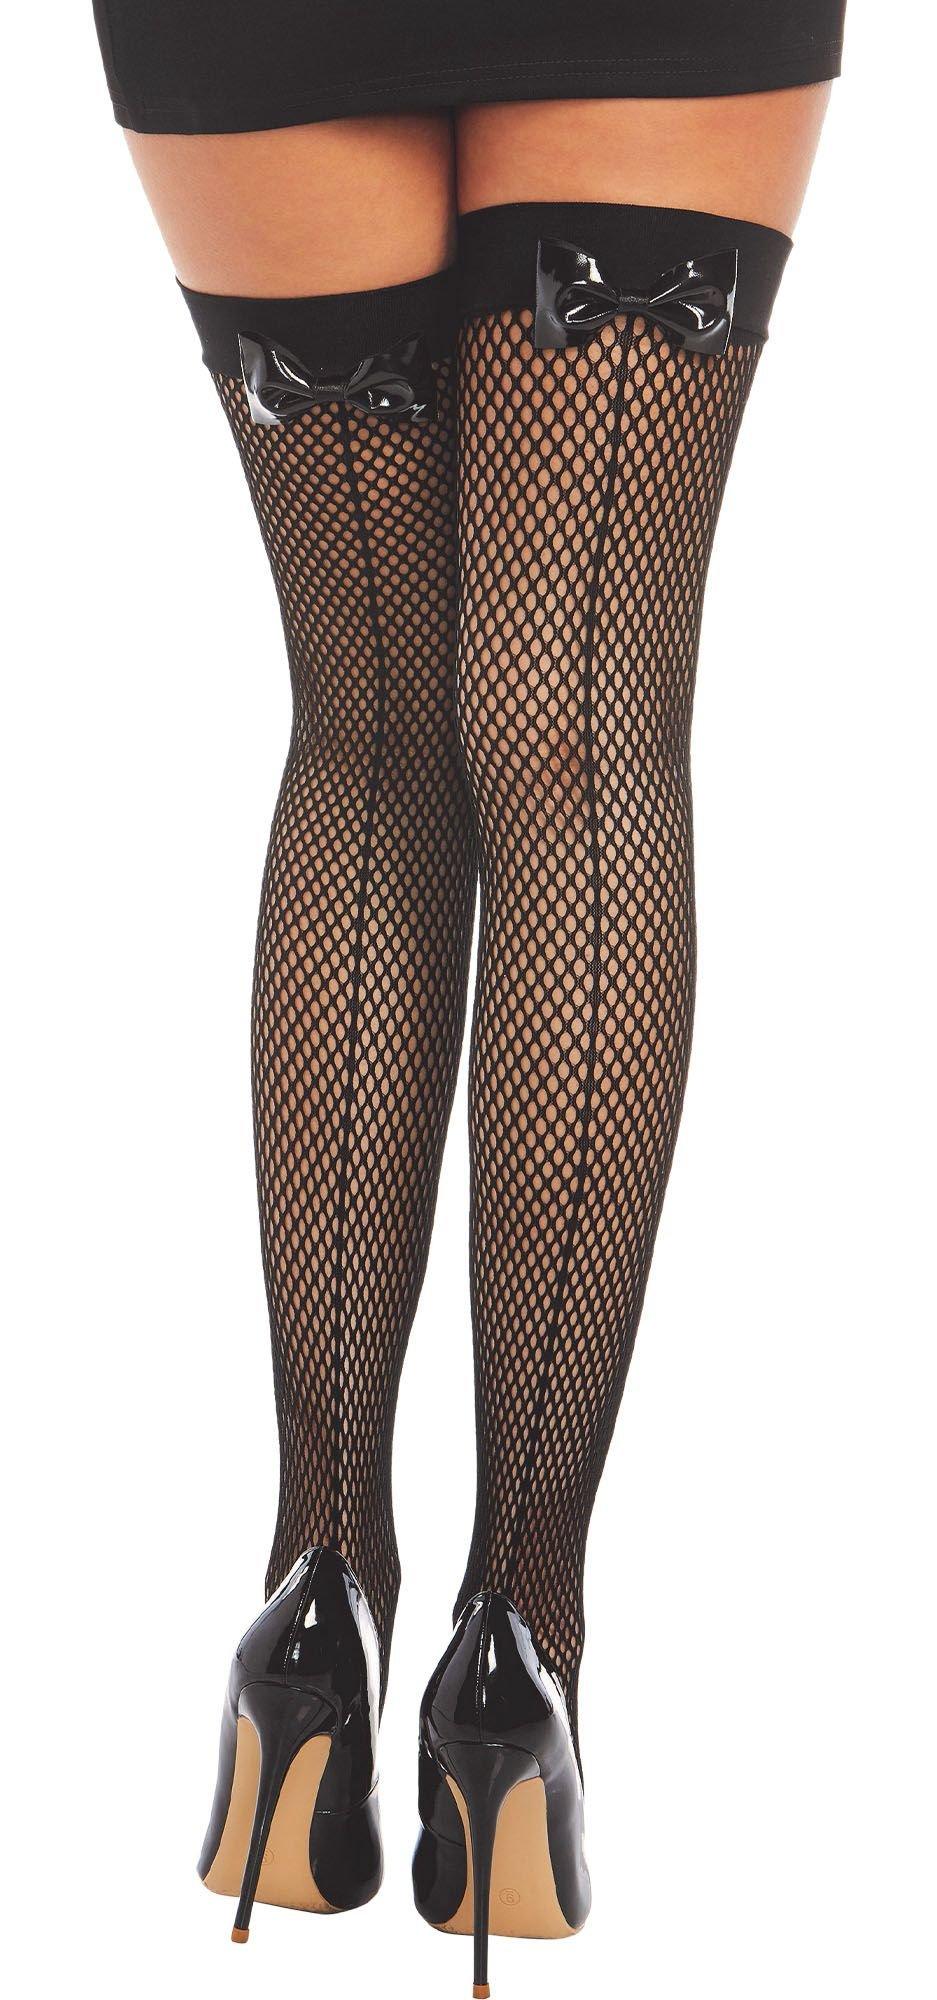 Plus Size Diamond Net Fishnet Thigh High Stockings, Black with Back Seam  and Vinyl Bow